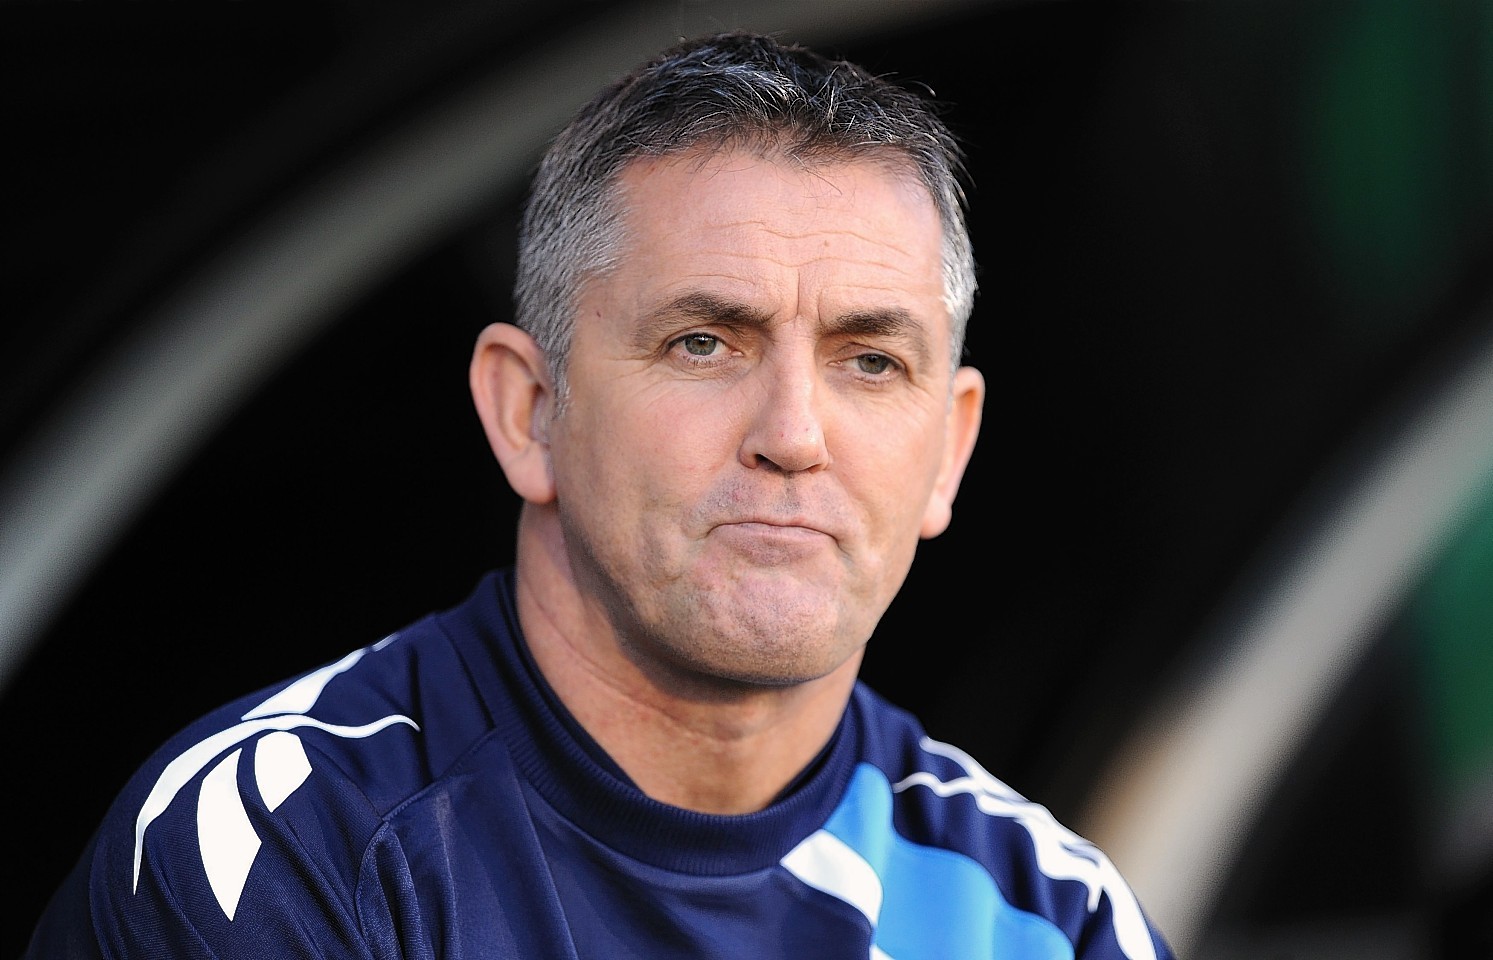 Owen Coyle will become new Ross County manager